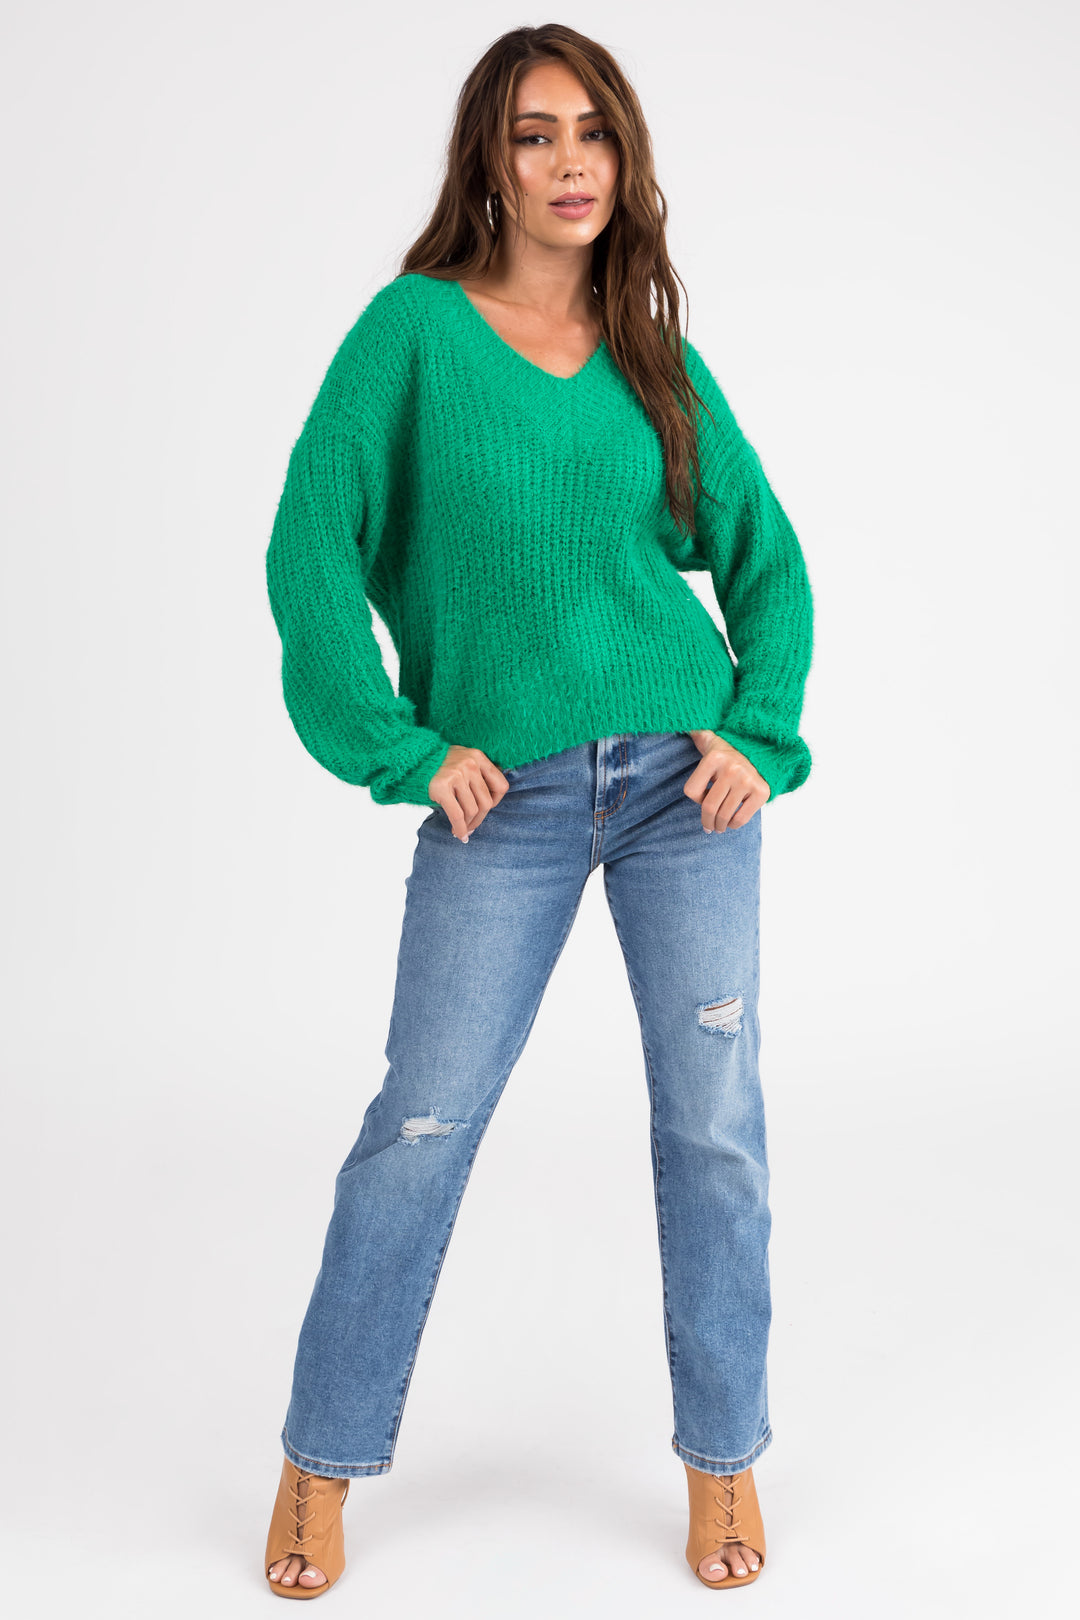 Kelly Green V Neck Long Sleeve Knit Sweater & Lime Lush